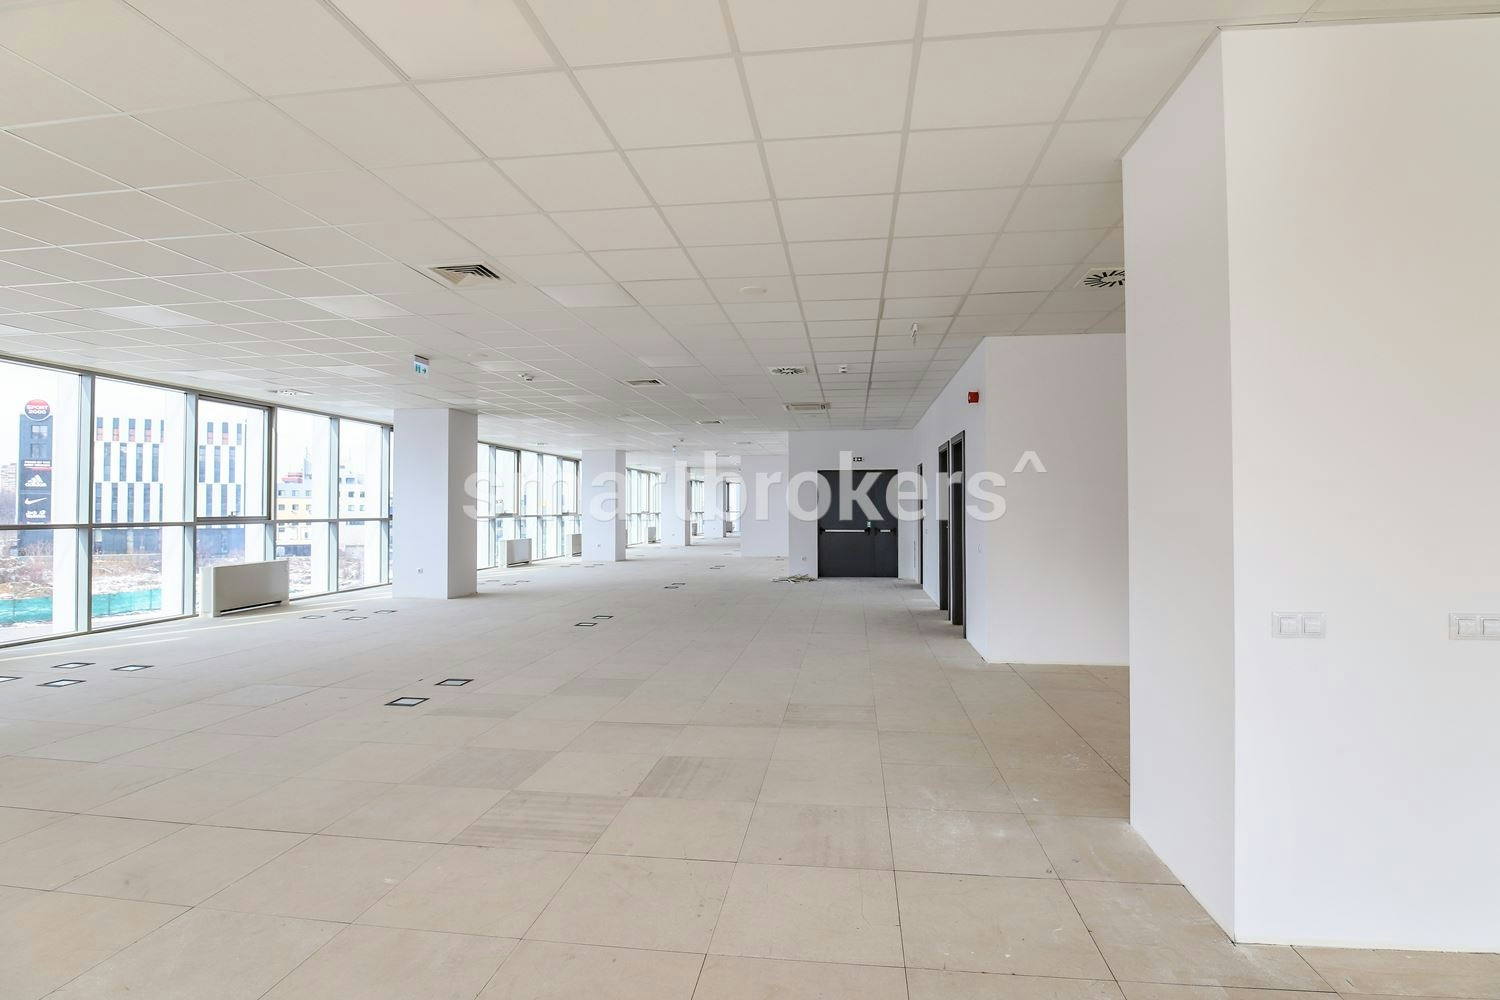 Office space for rent in a sustainable and comfortable building Sofia Office Center located on Tsarigradsko Shosse Blvd.